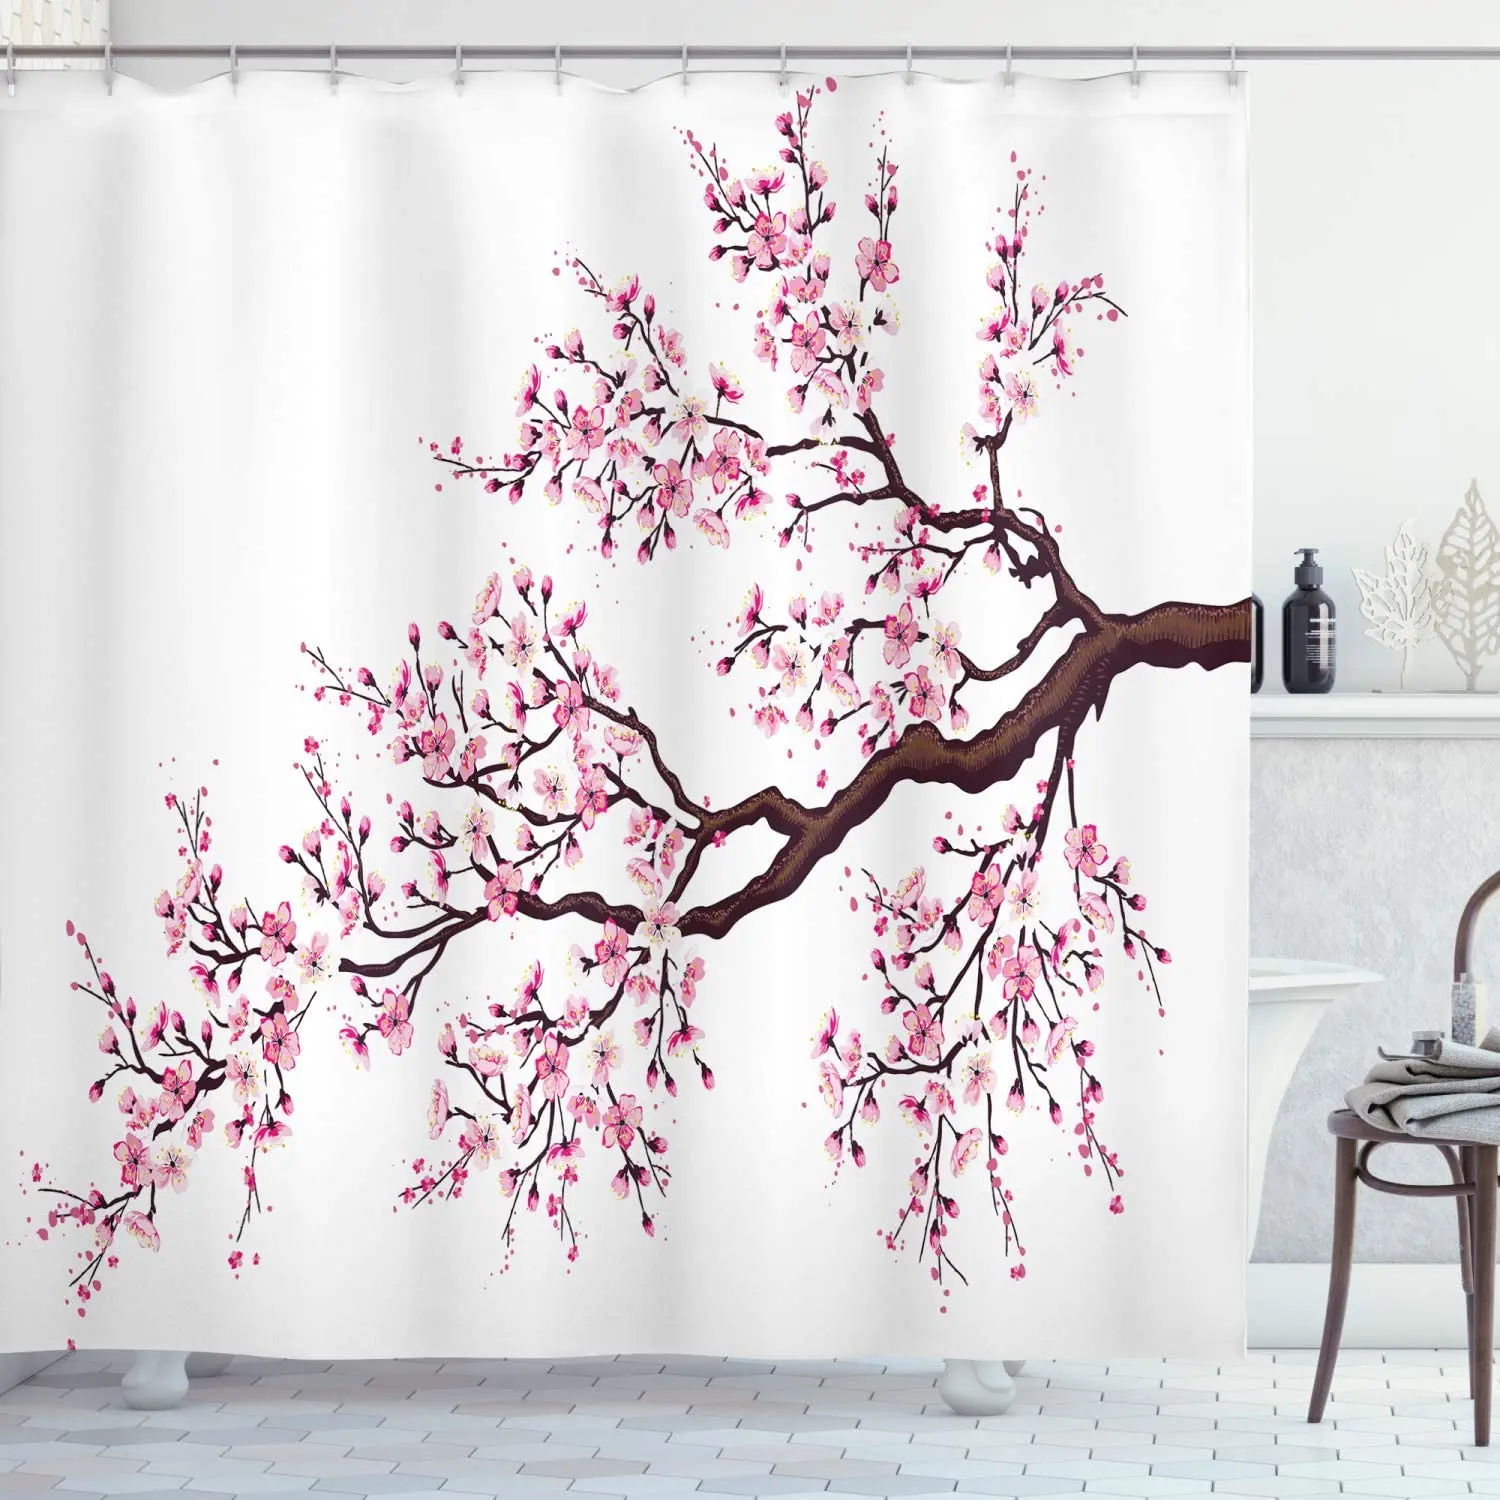 

Chinese Watercolor Painting Shower Curtain Pink Floral Cherry Sakura Red Plum Blossom Trees Branch Birds Style Bathroom Curtains